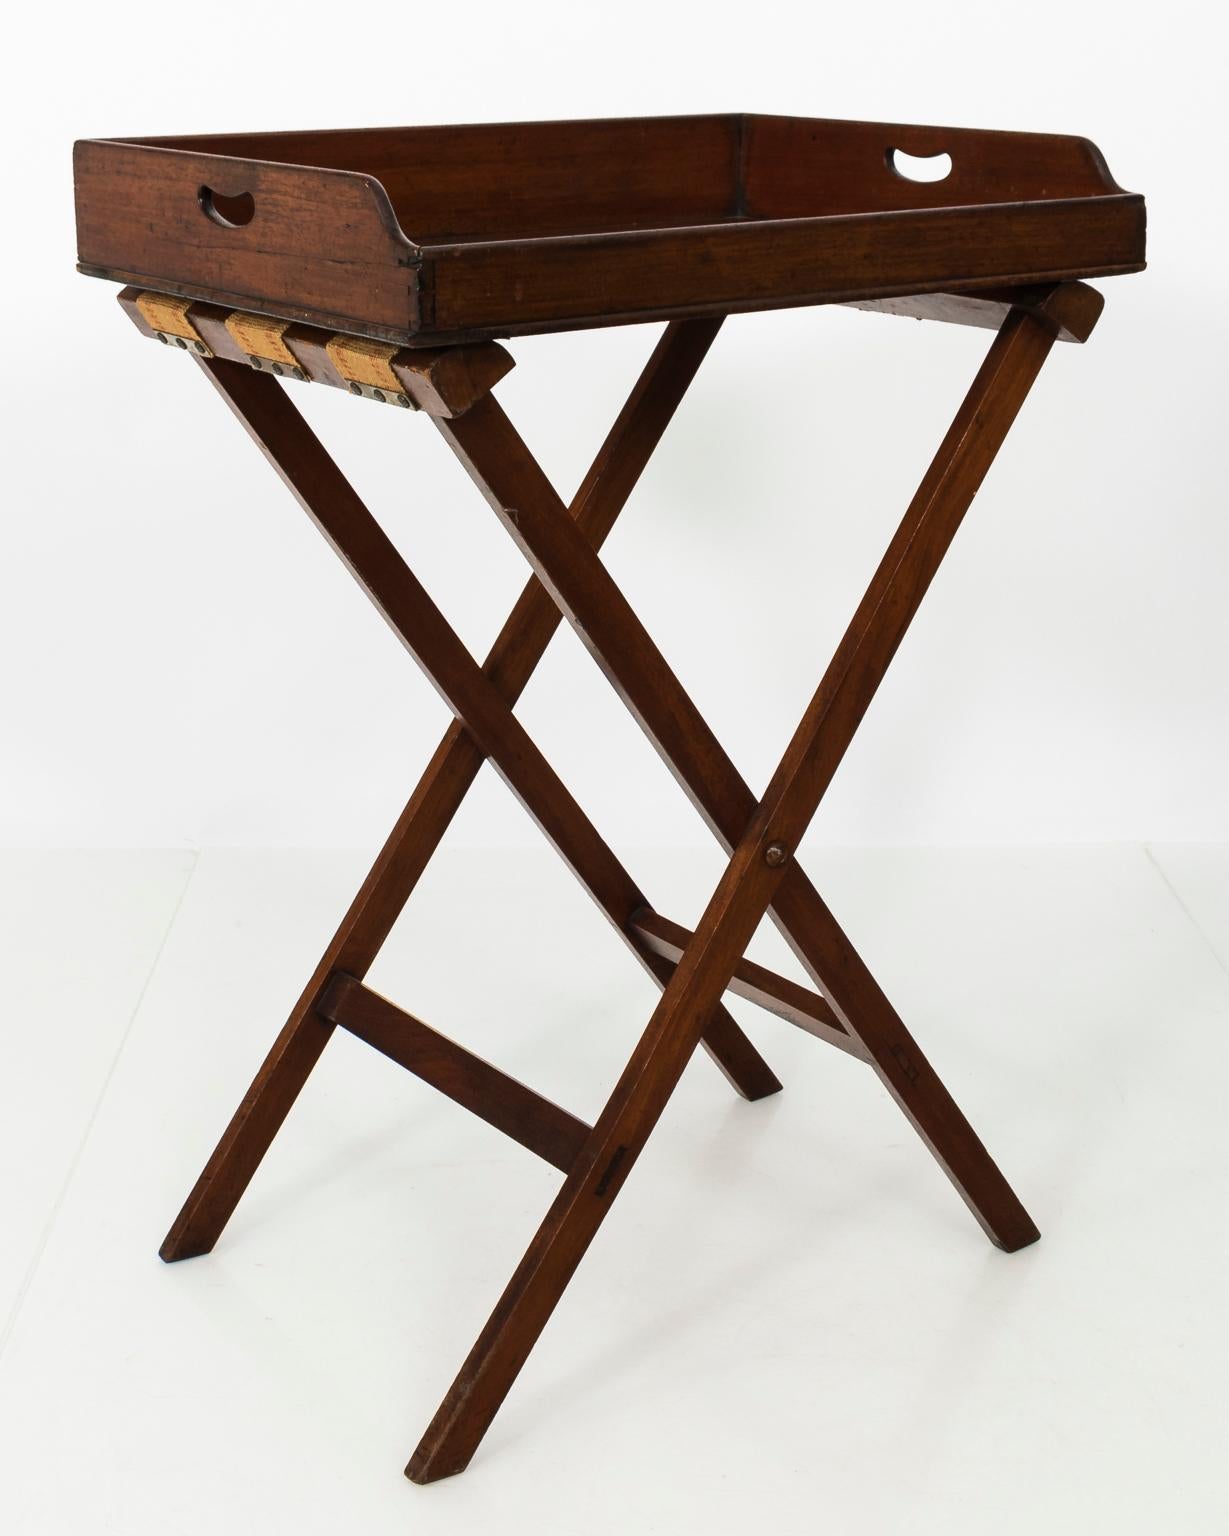 19th century English butler's tray table with gallery and a folding Stand base, circa 1840.
 